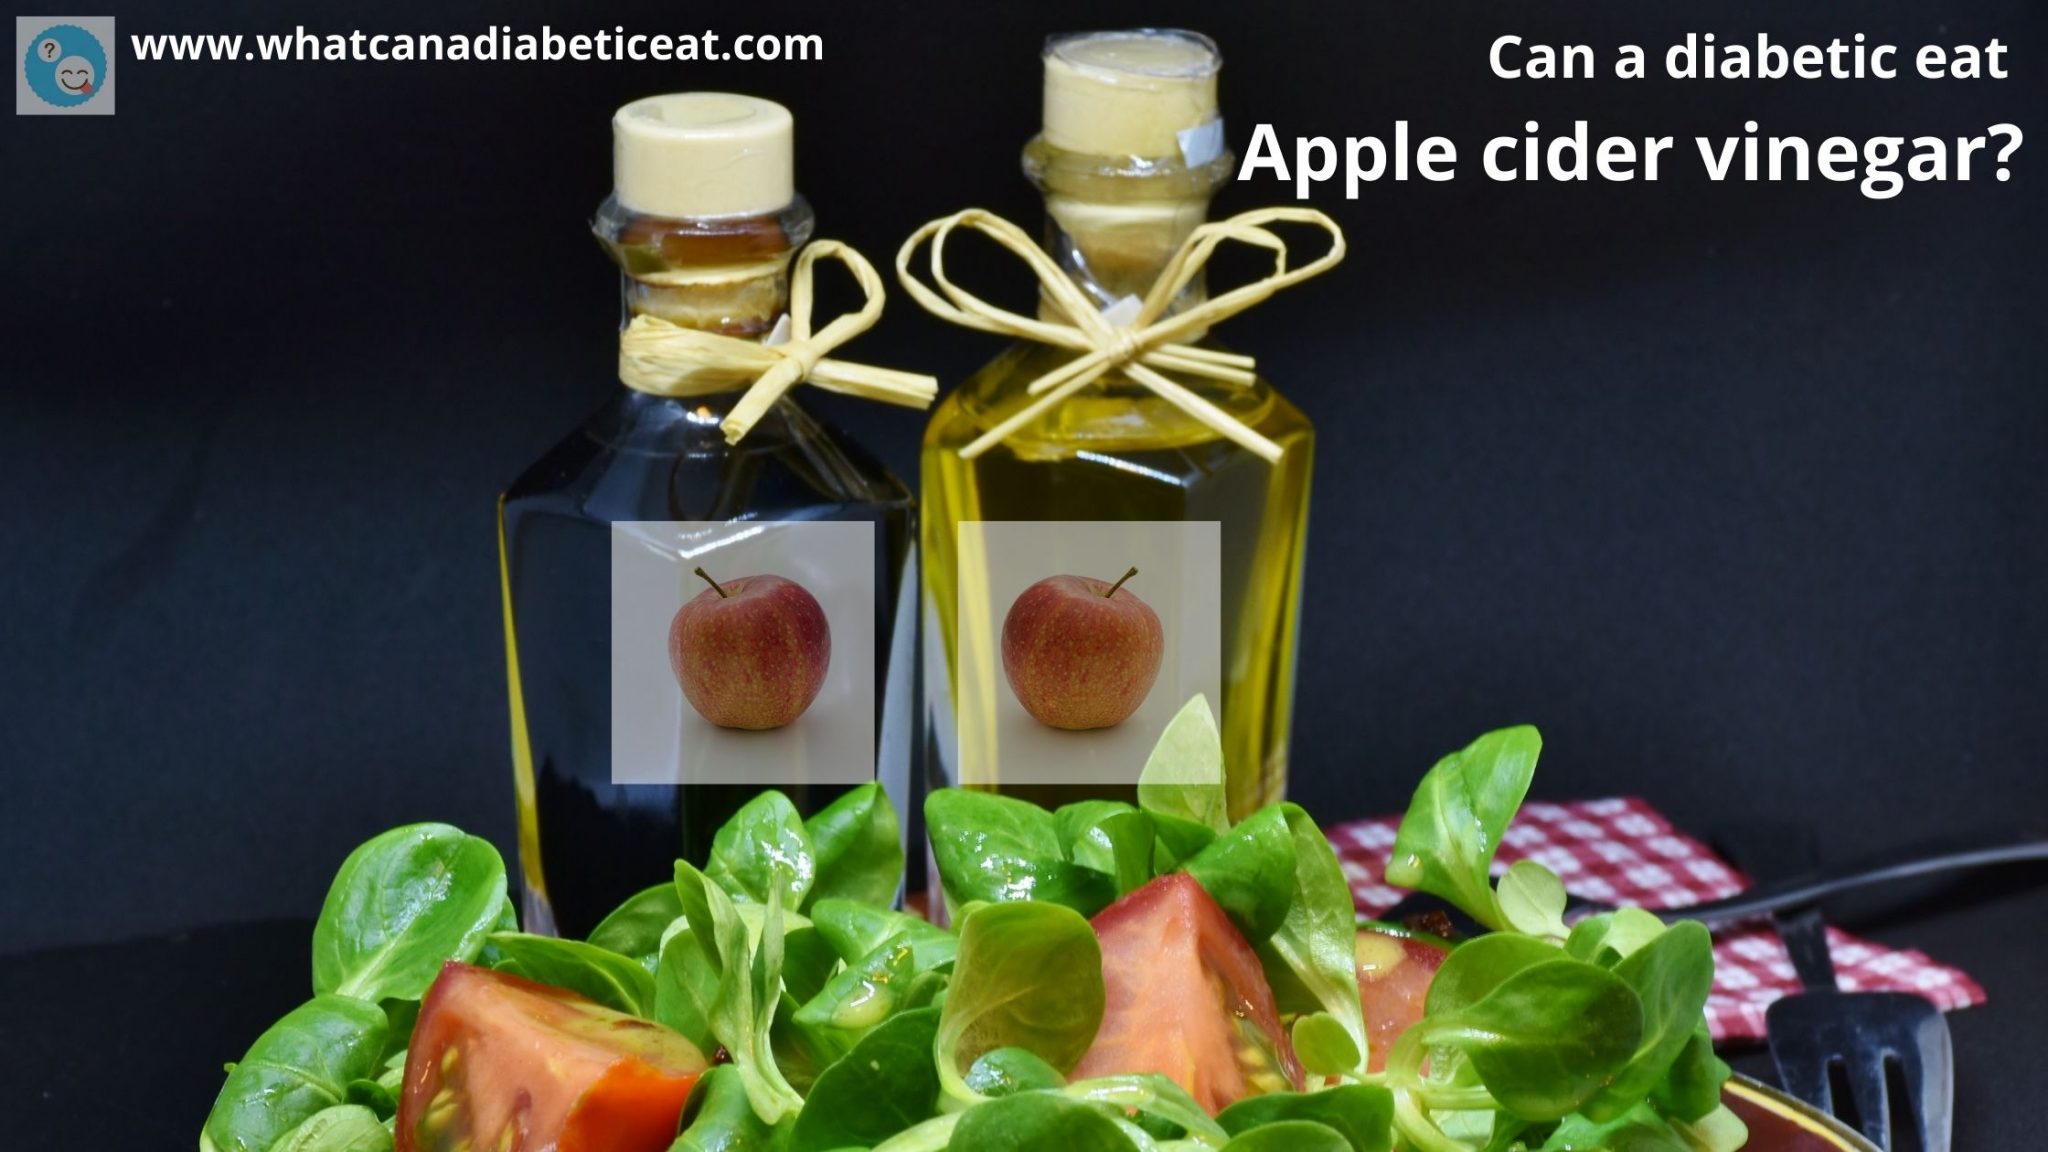 Can a diabetic eat Apple cider vinegar to lower blood sugar?